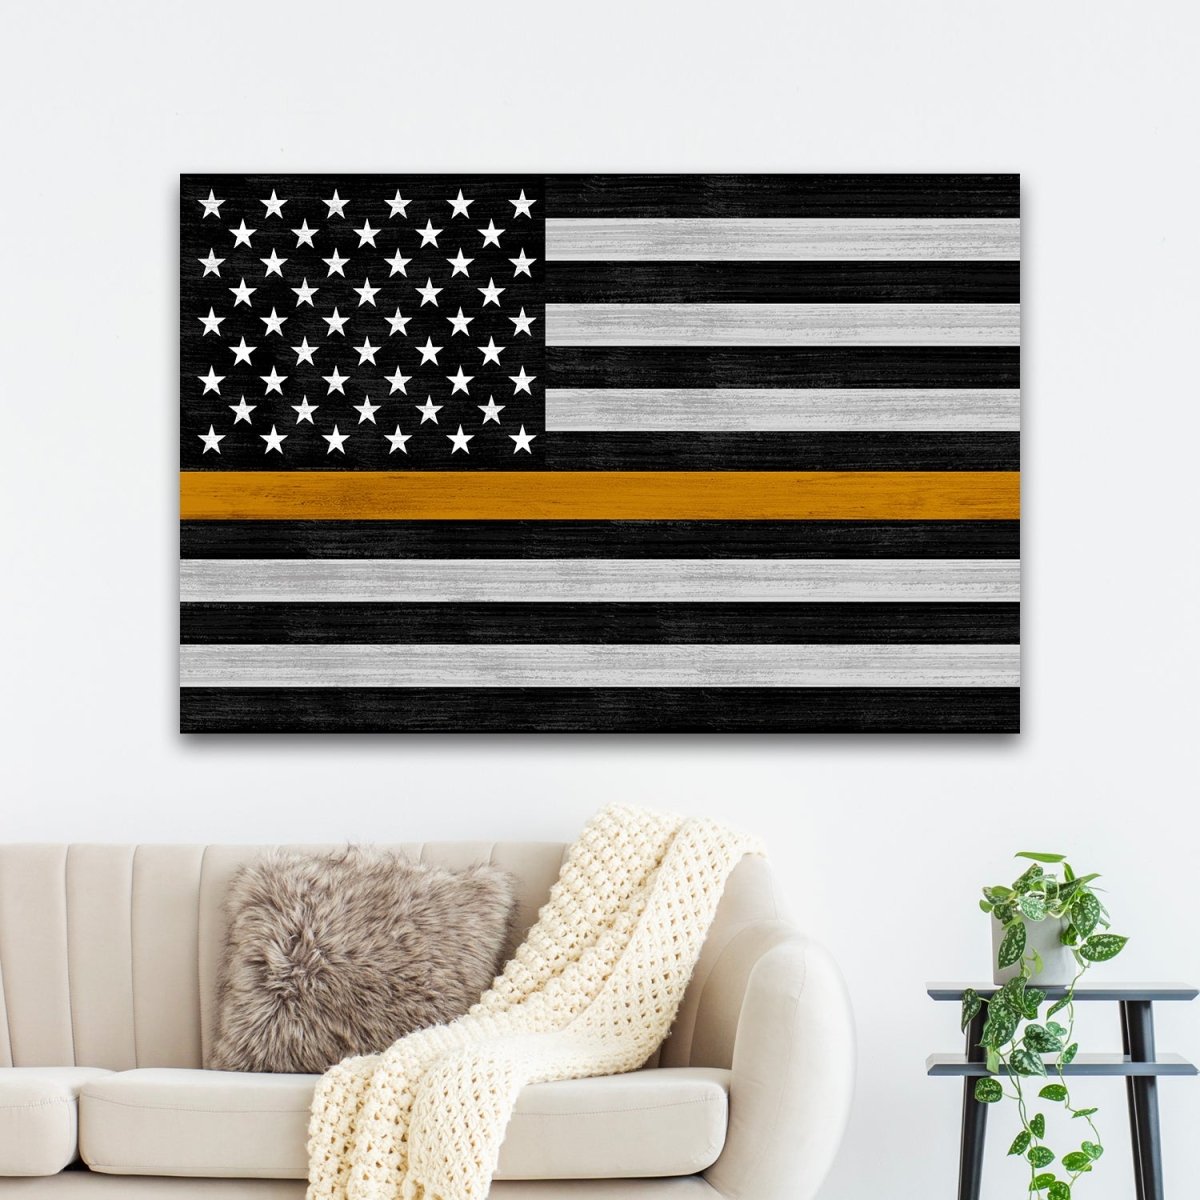 Gold Line Flag Canvas Sign For 911 Dispatchers & Tow Truck Drivers Above Couch - Pretty Perfect Studio